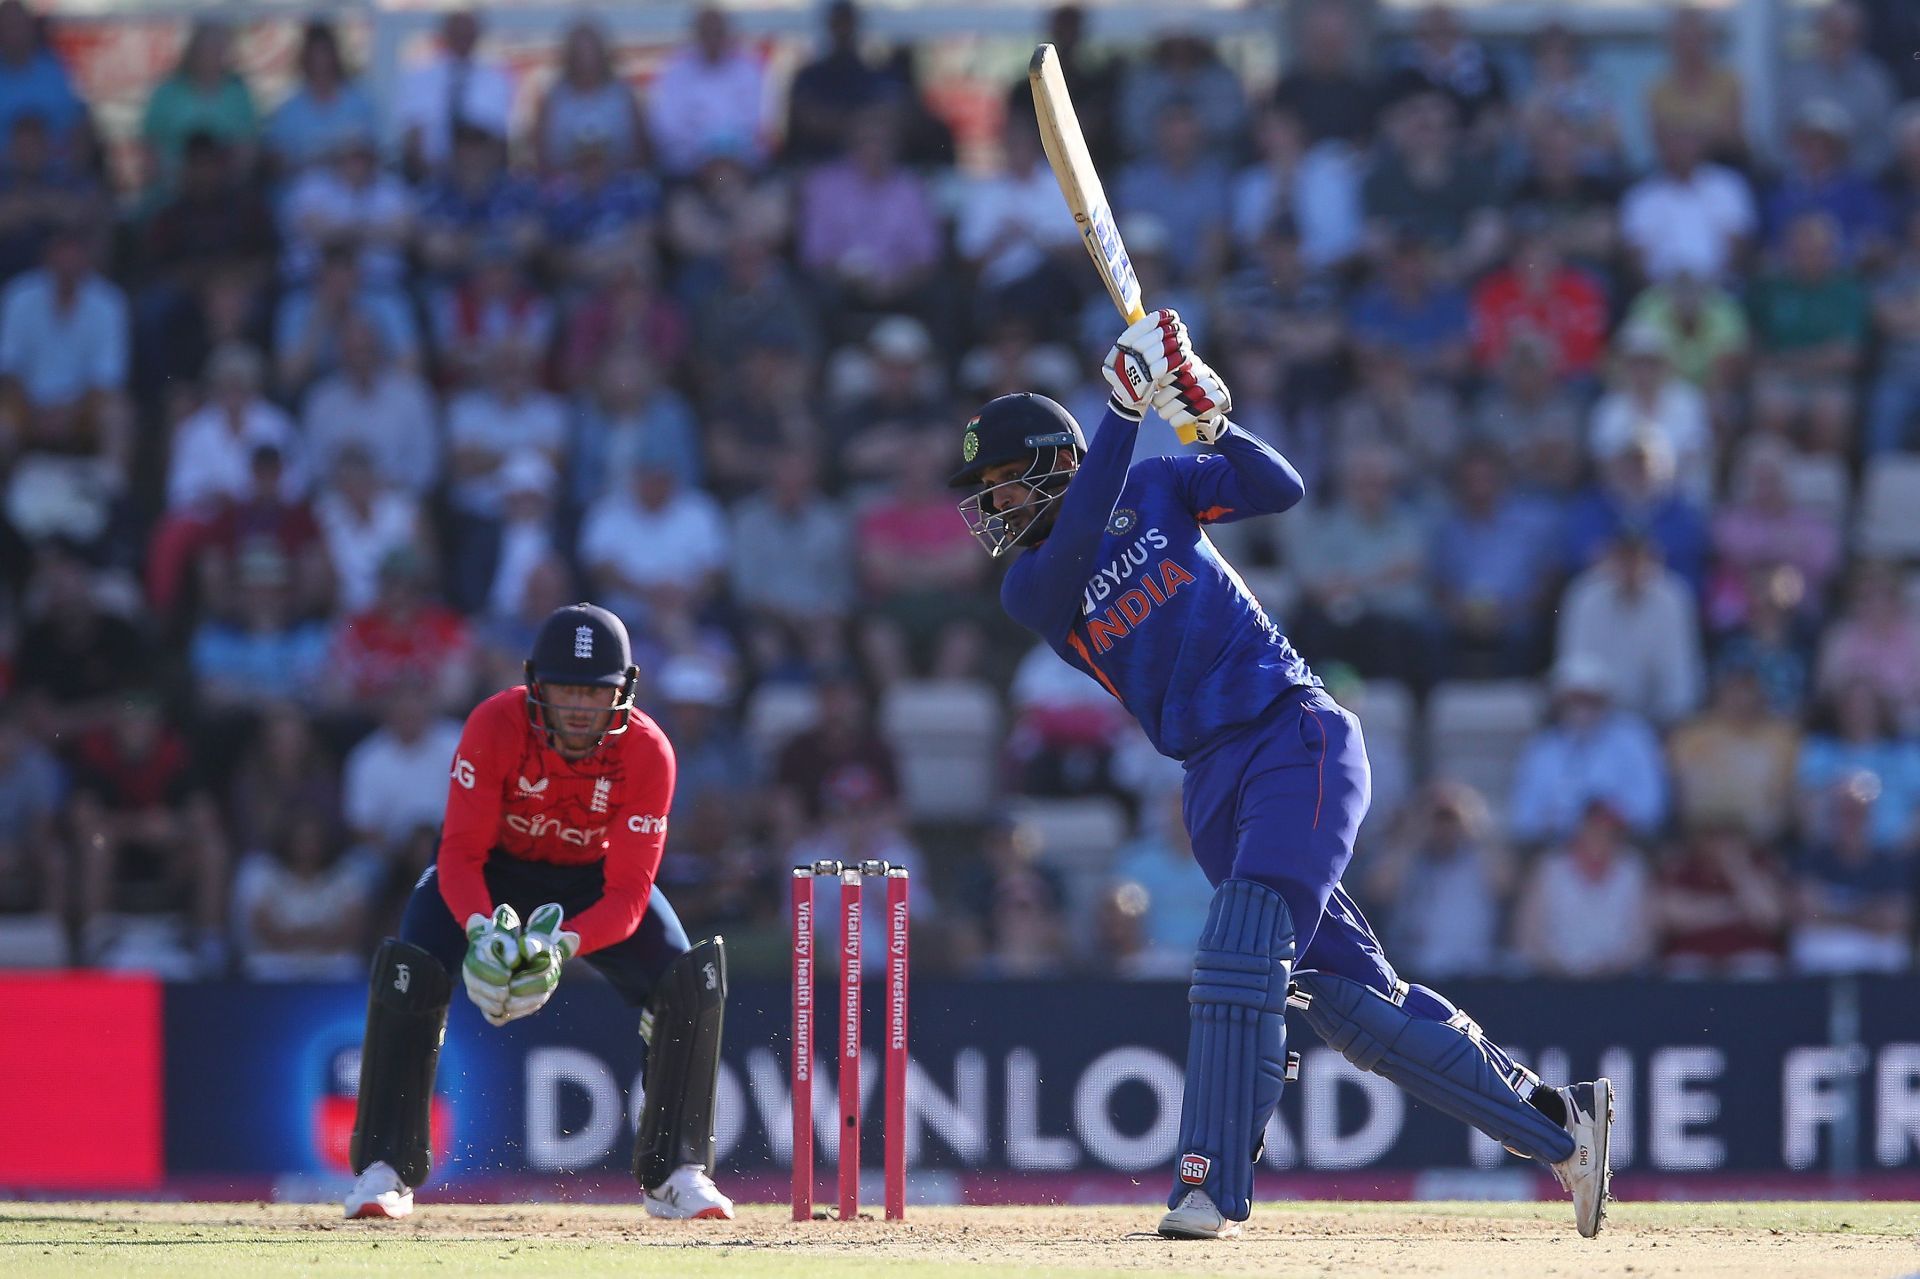 Deepak Hooda gave a decent account of himself in the first T20I against England